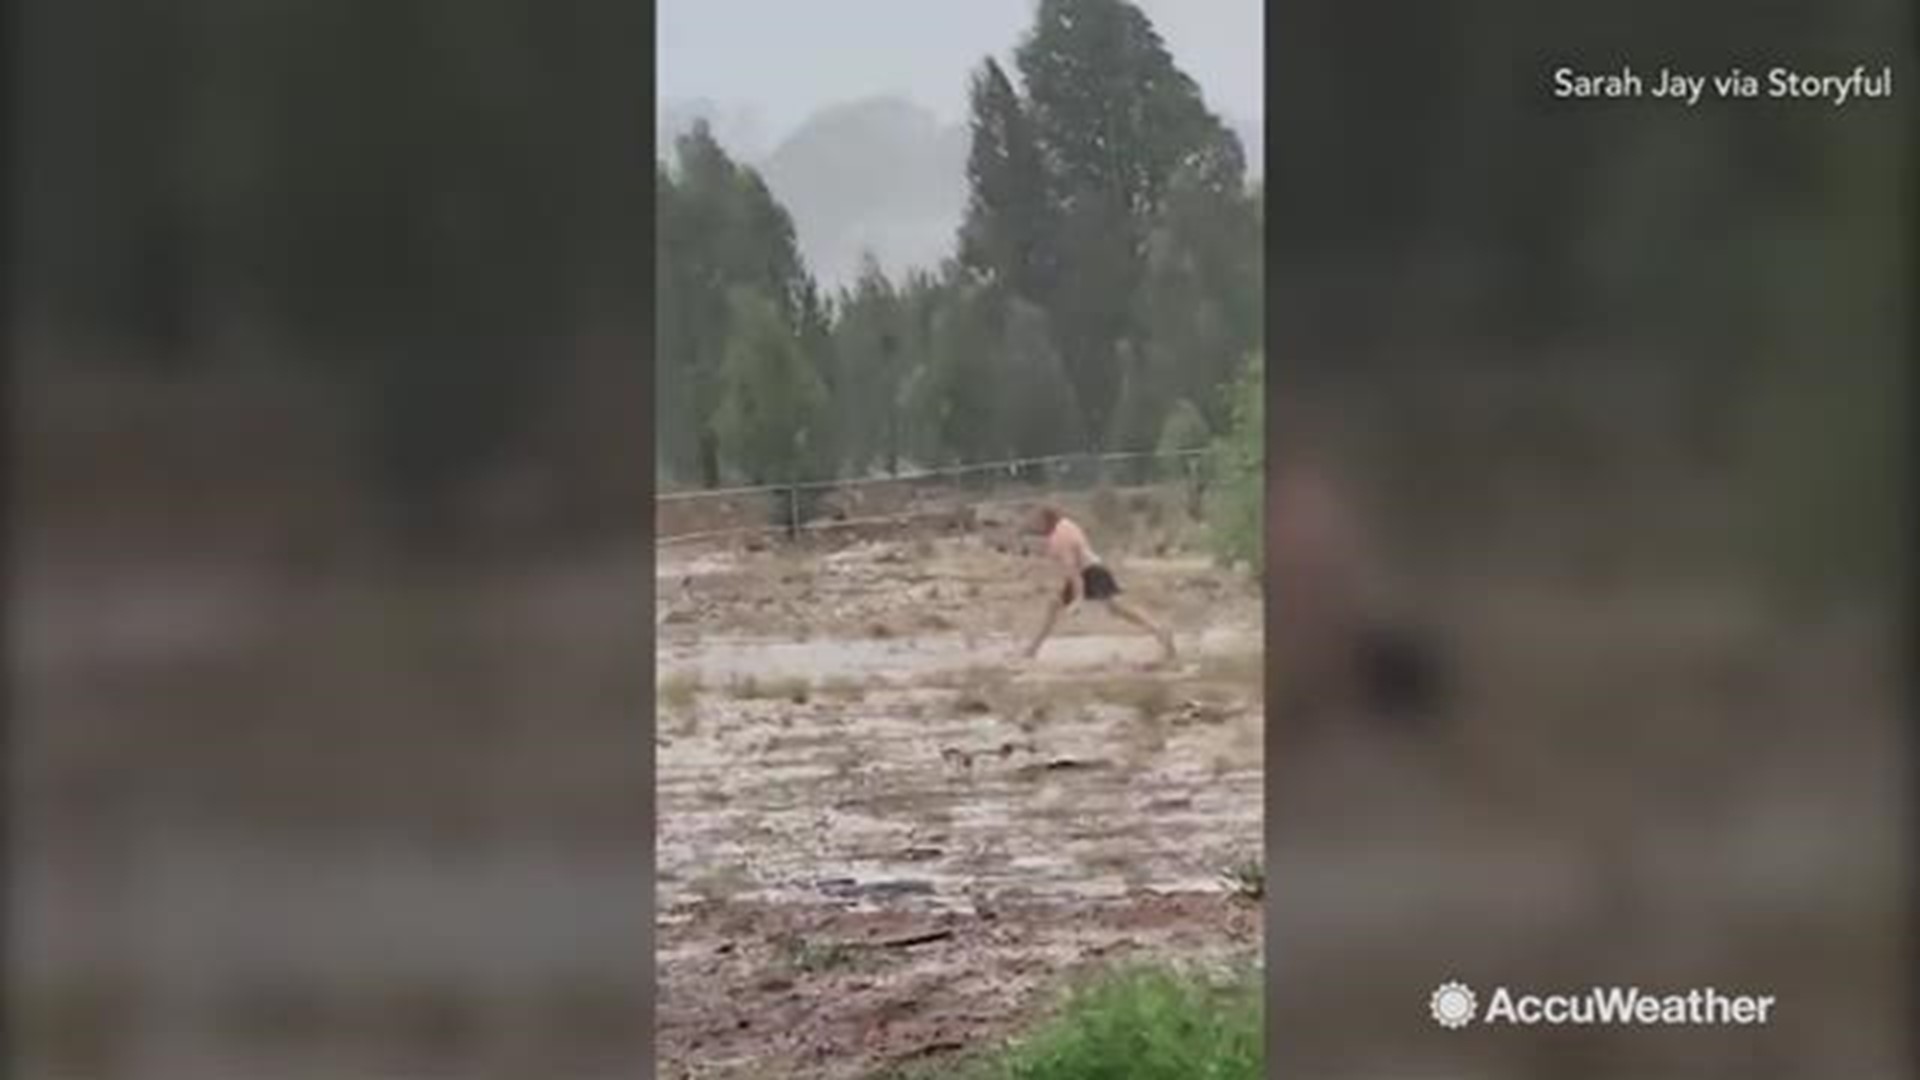 On Jan 20 Australia finally got its first severe rainfall in over 100 days, and this man from Dubbo, New South Wales knew how to celebrate. According to the videographer, the man grabbed a beer and tore off his shirts before heading outside to enjoy the r